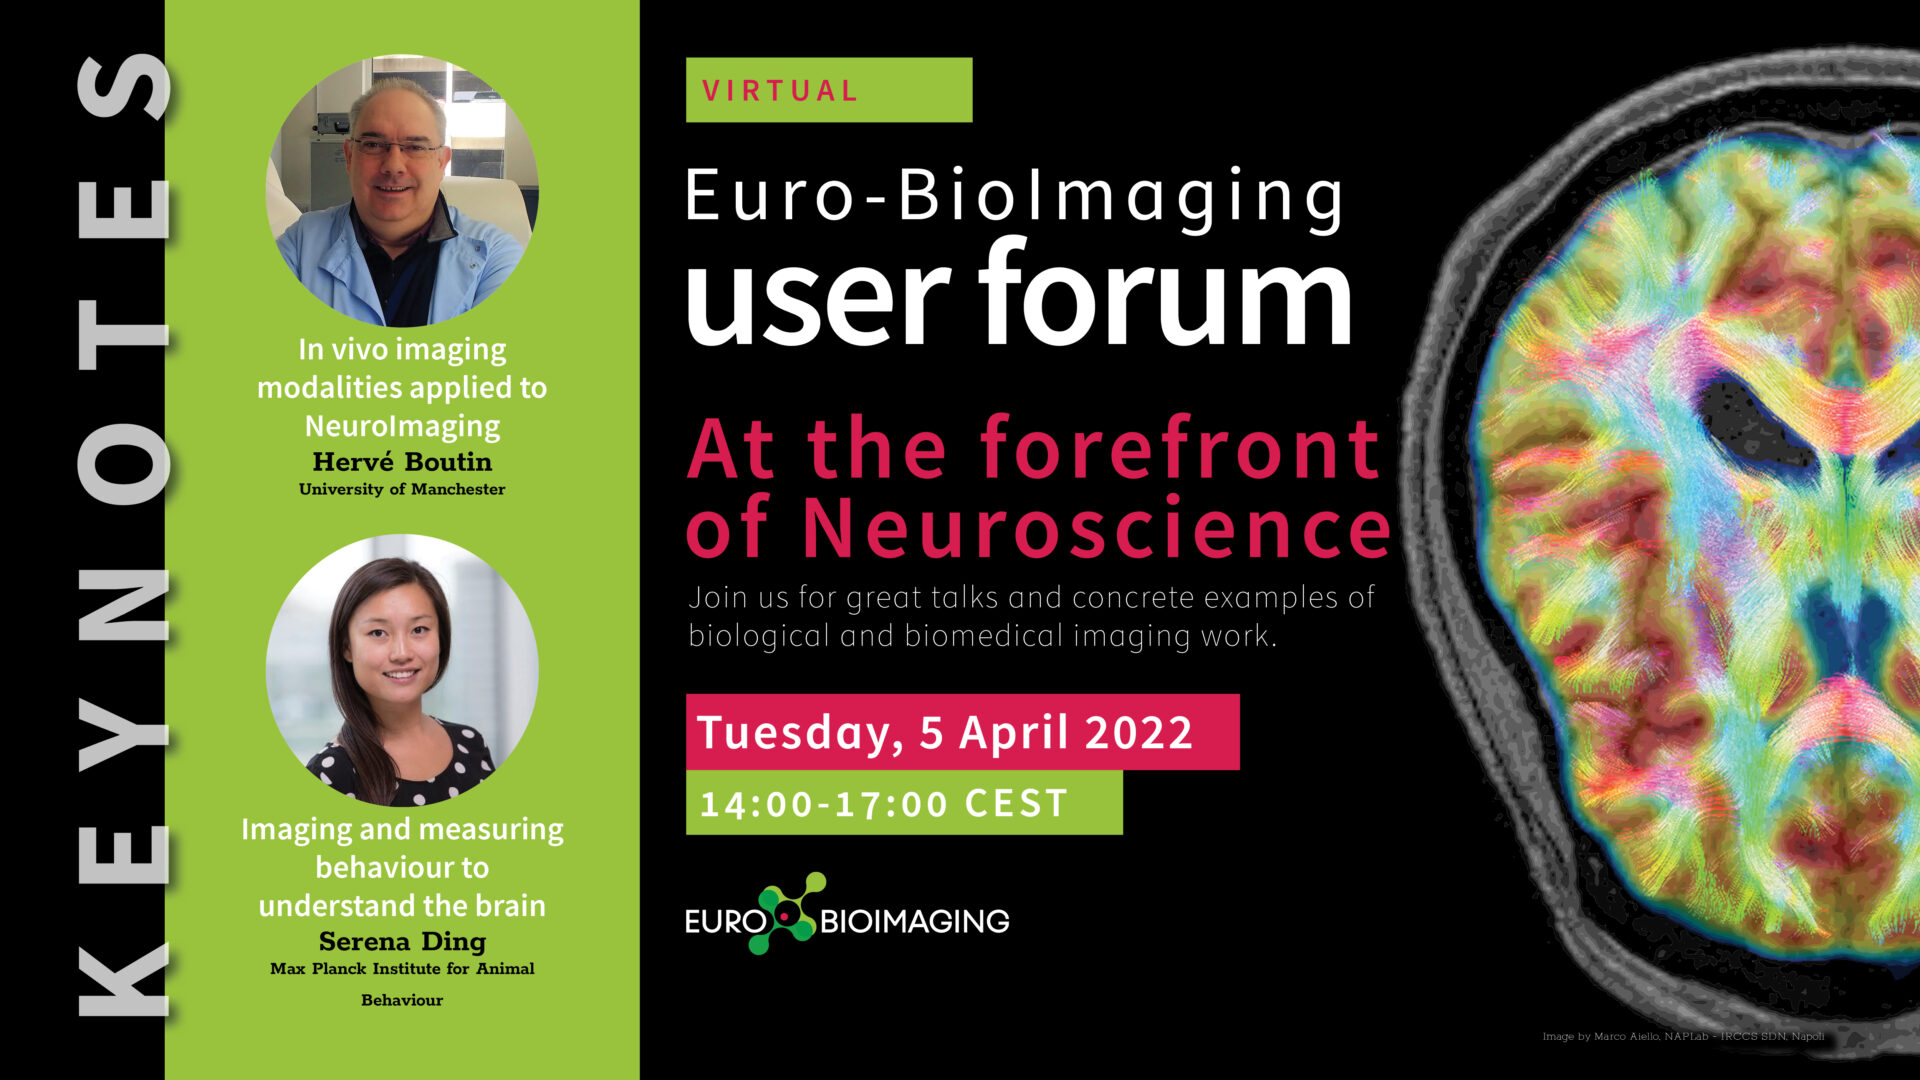 Euro-BioImaging User Forum about the Forefront of Neuroscience